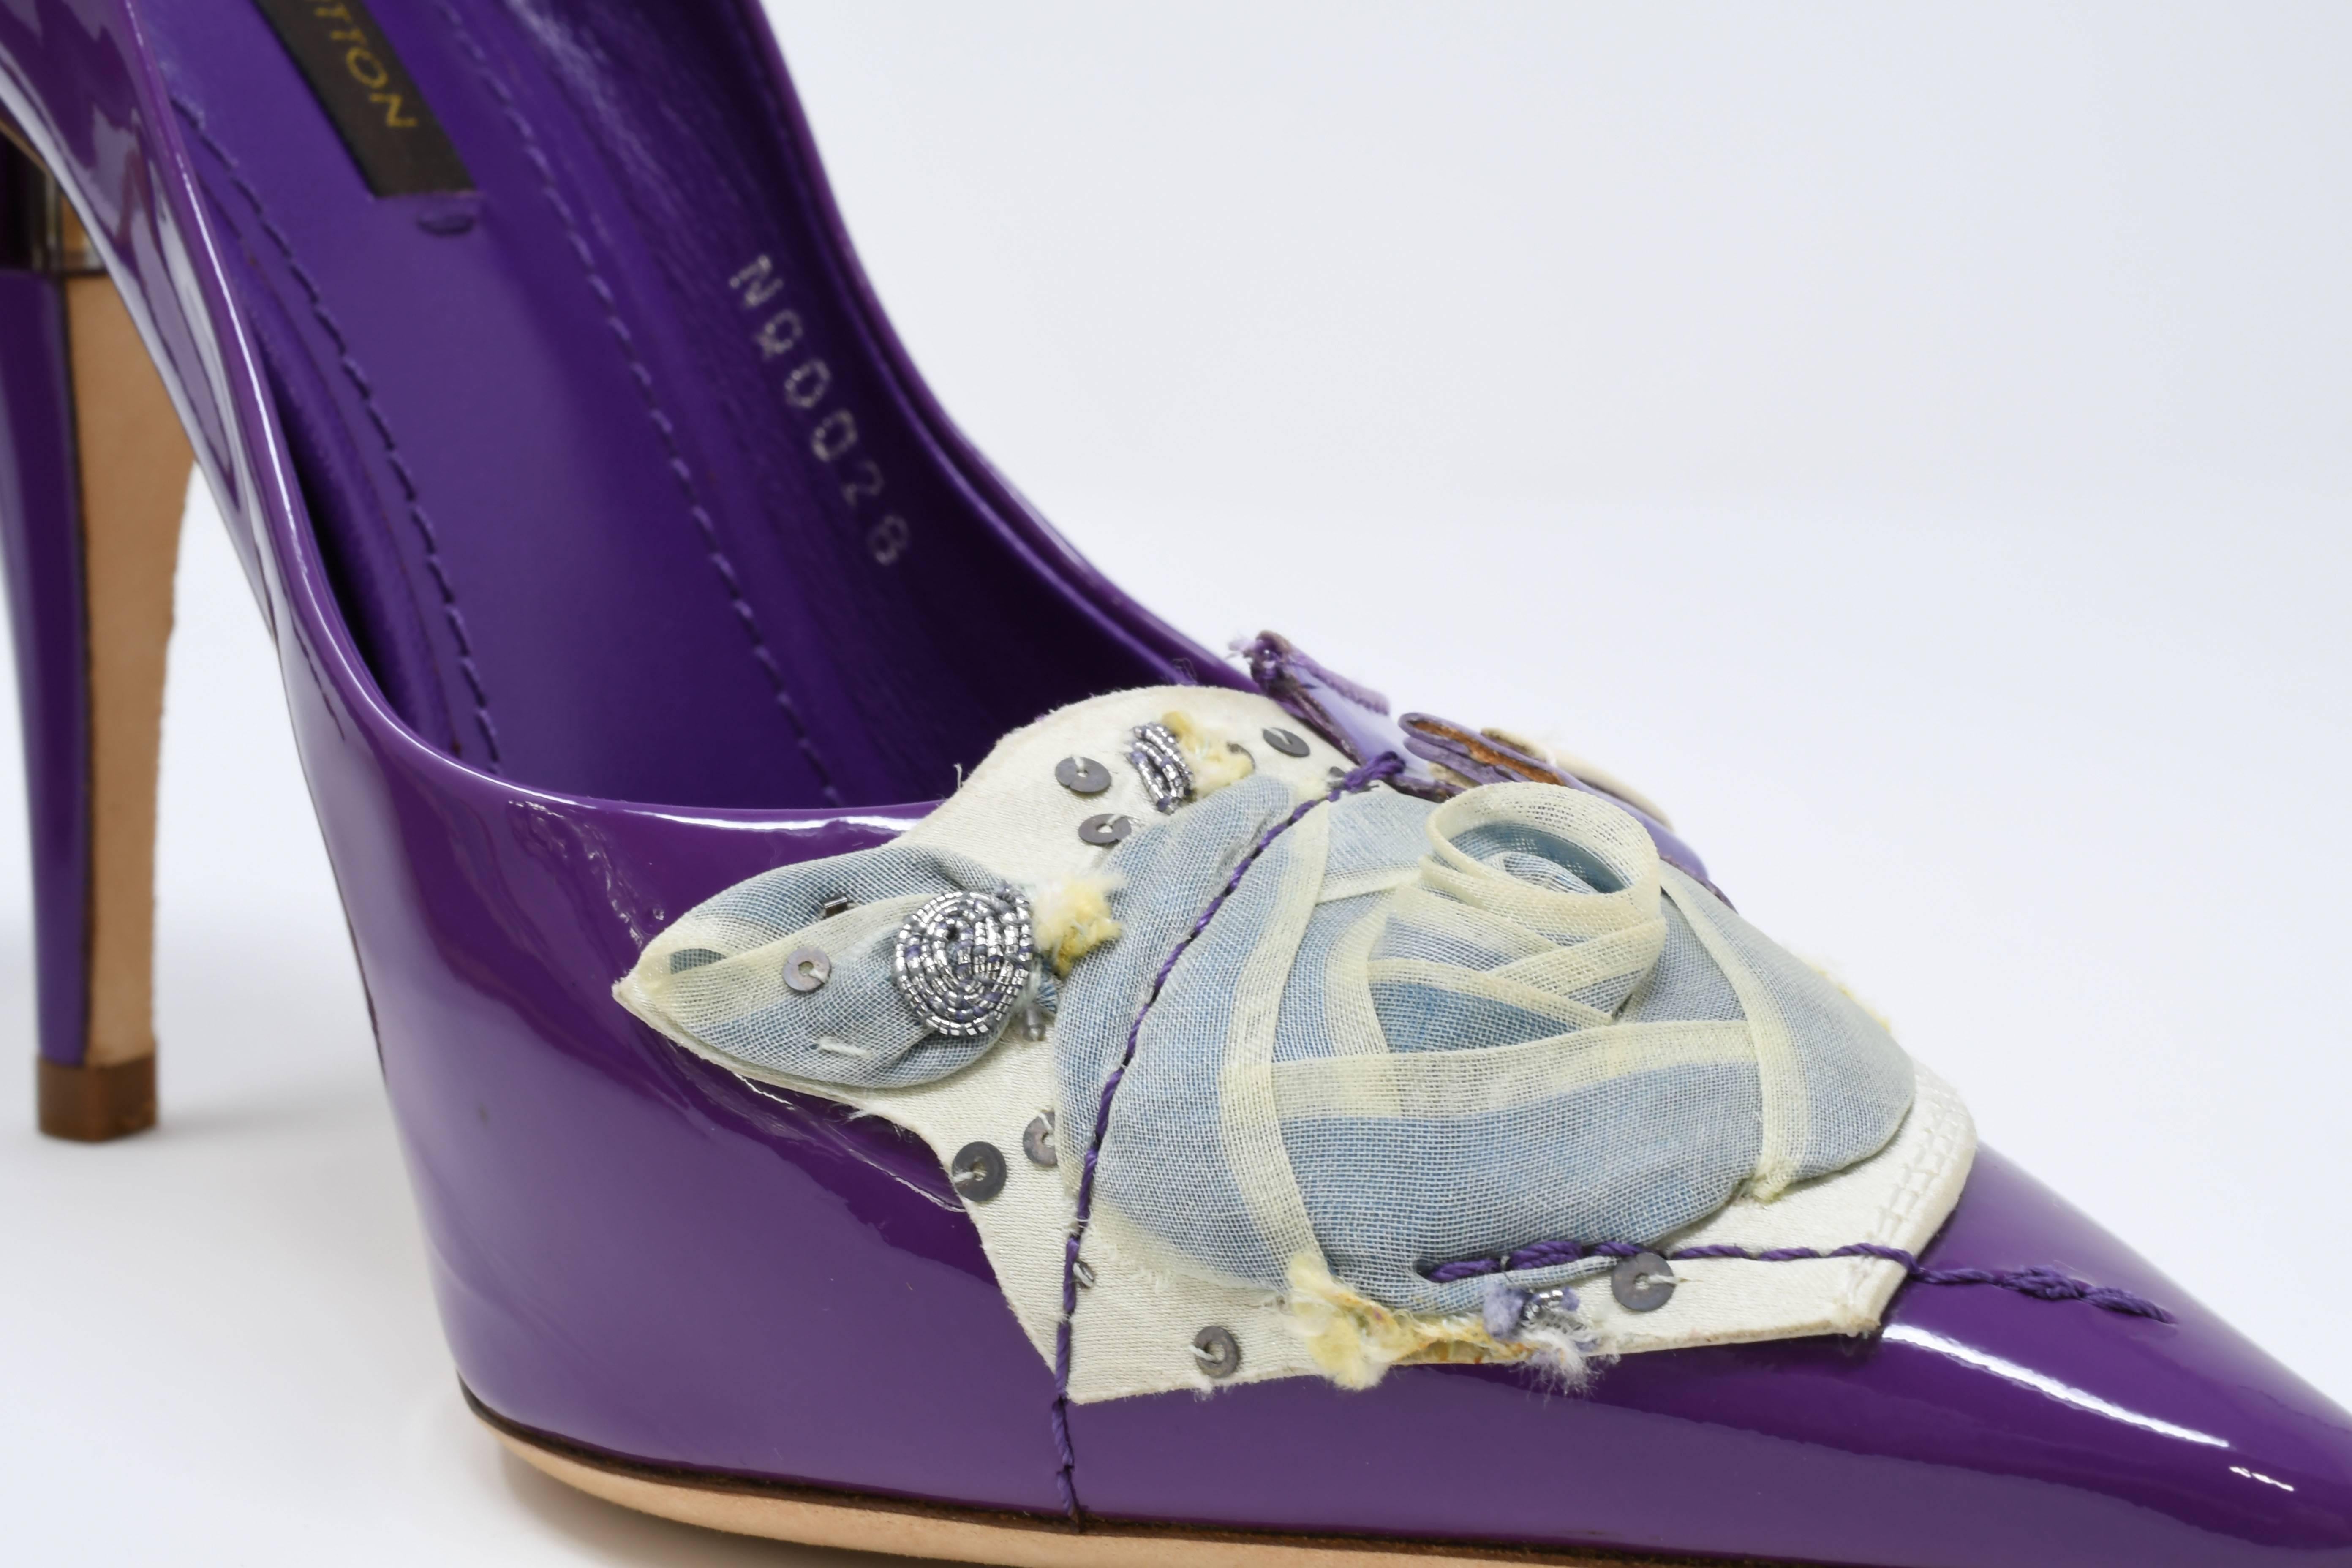 Louis Vuitton After Dark Riviera Violet Patent Leather Pumps Women's Size 37.  Patchwork montage on vamp with fabric Rose and patent leather pieces; embroidered sequin and bead detailing.  Features smooth grained leather lining and padded insole